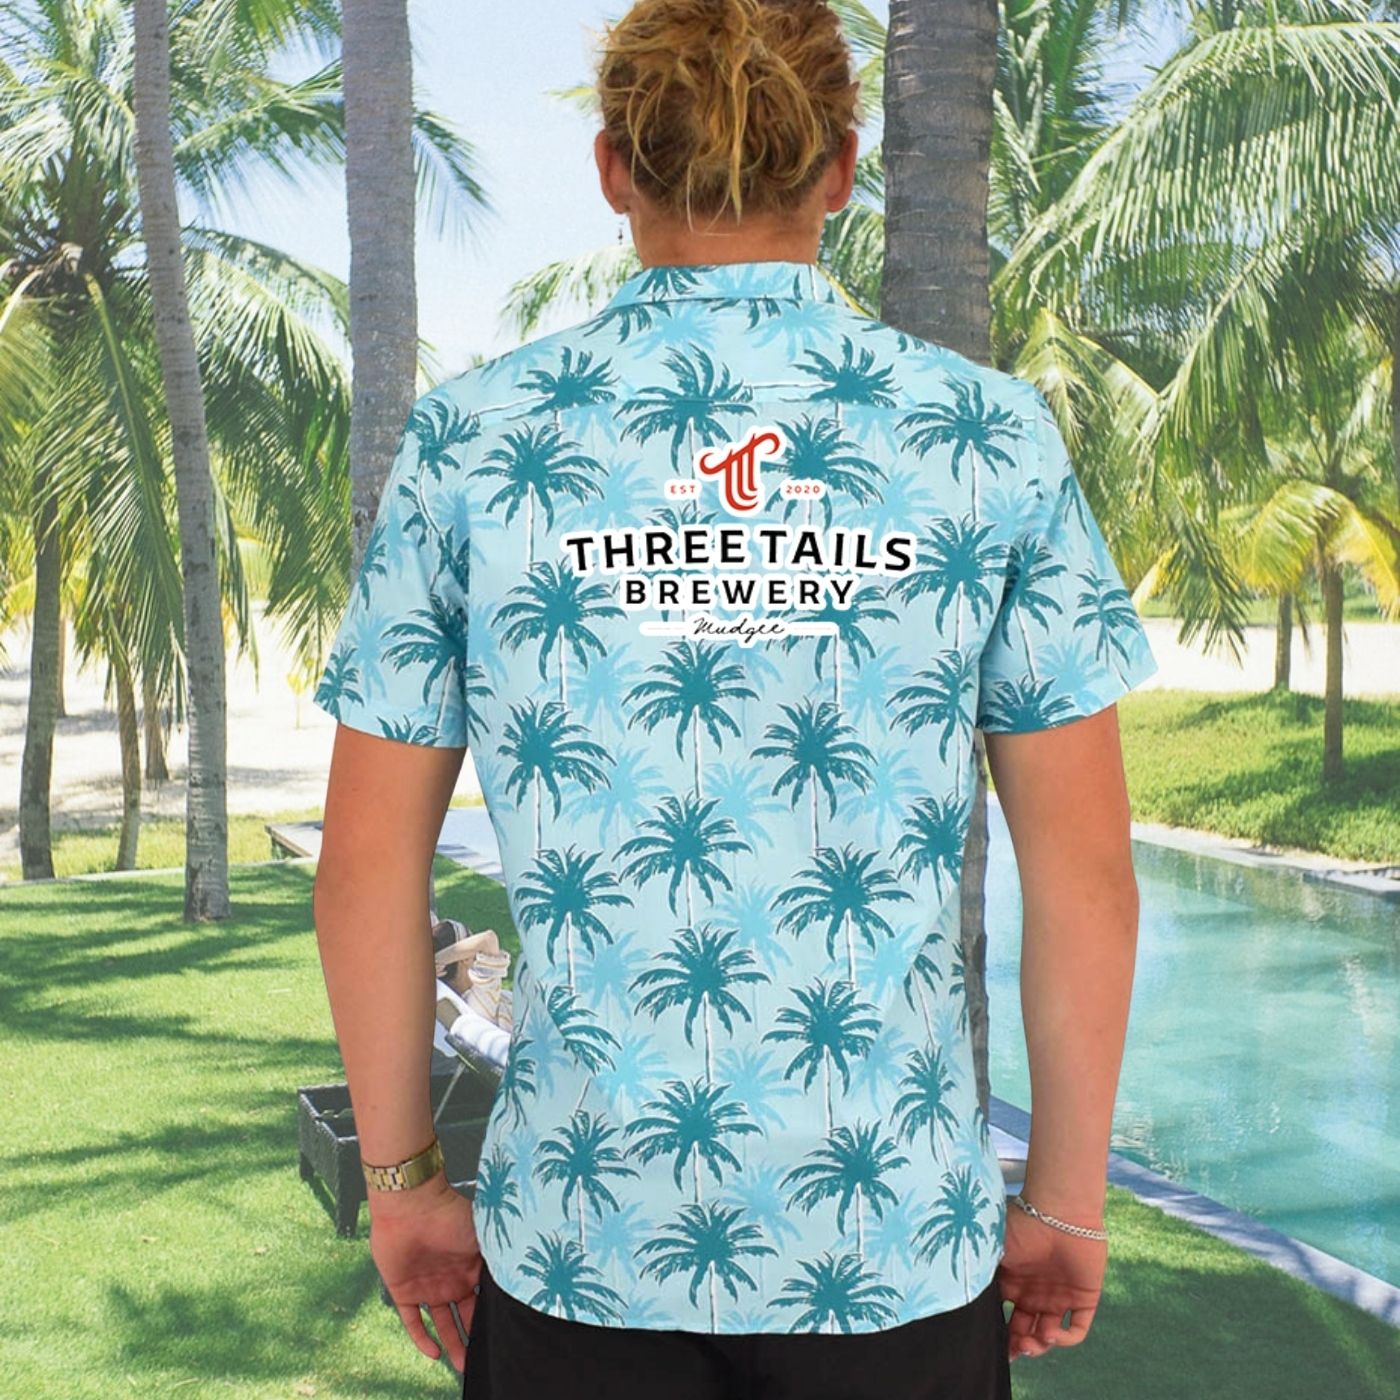 Custom Hospitality Hawaiian Shirts add your logo screen printed, embroidered or heat-press. Names and logo for customised corporate uniforms or groups